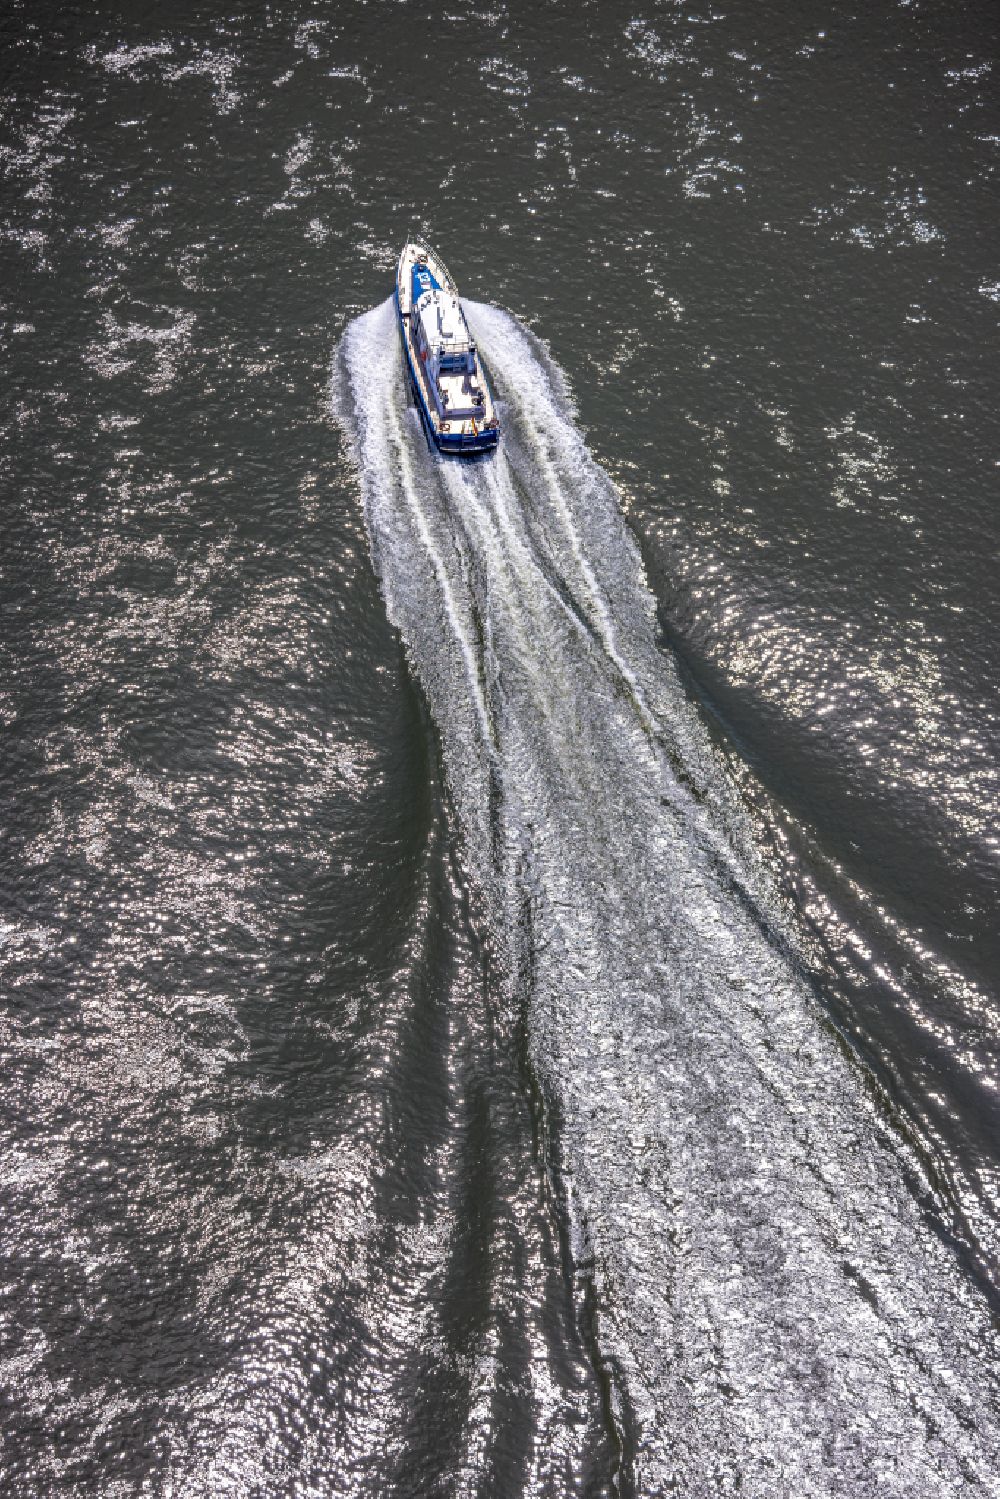 Aerial photograph Duisburg - Motor boat of the water police, WSP 13, driving on the river Rhein in Duisburg in the Ruhr area in the state of North Rhine-Westphalia, Germany